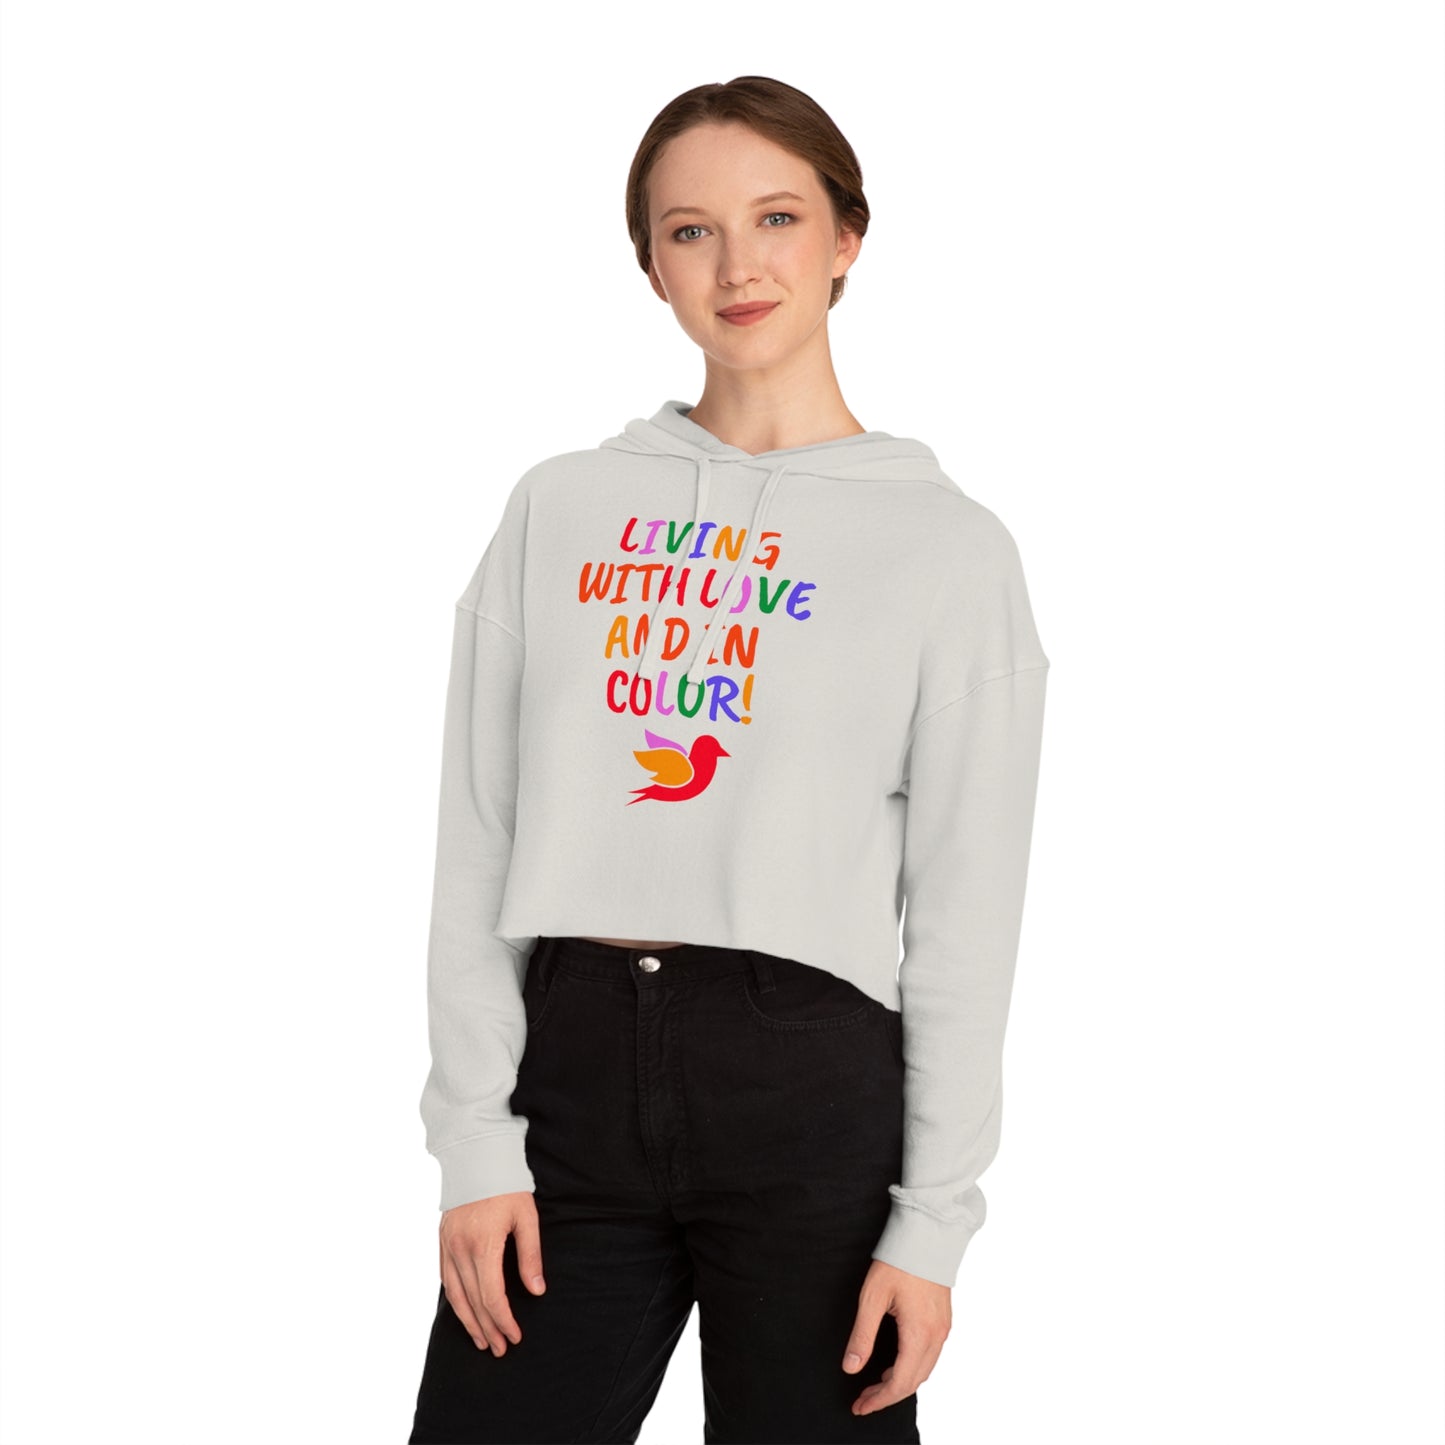 Love & Color Women’s Cropped Hooded Sweatshirt (3 colors)